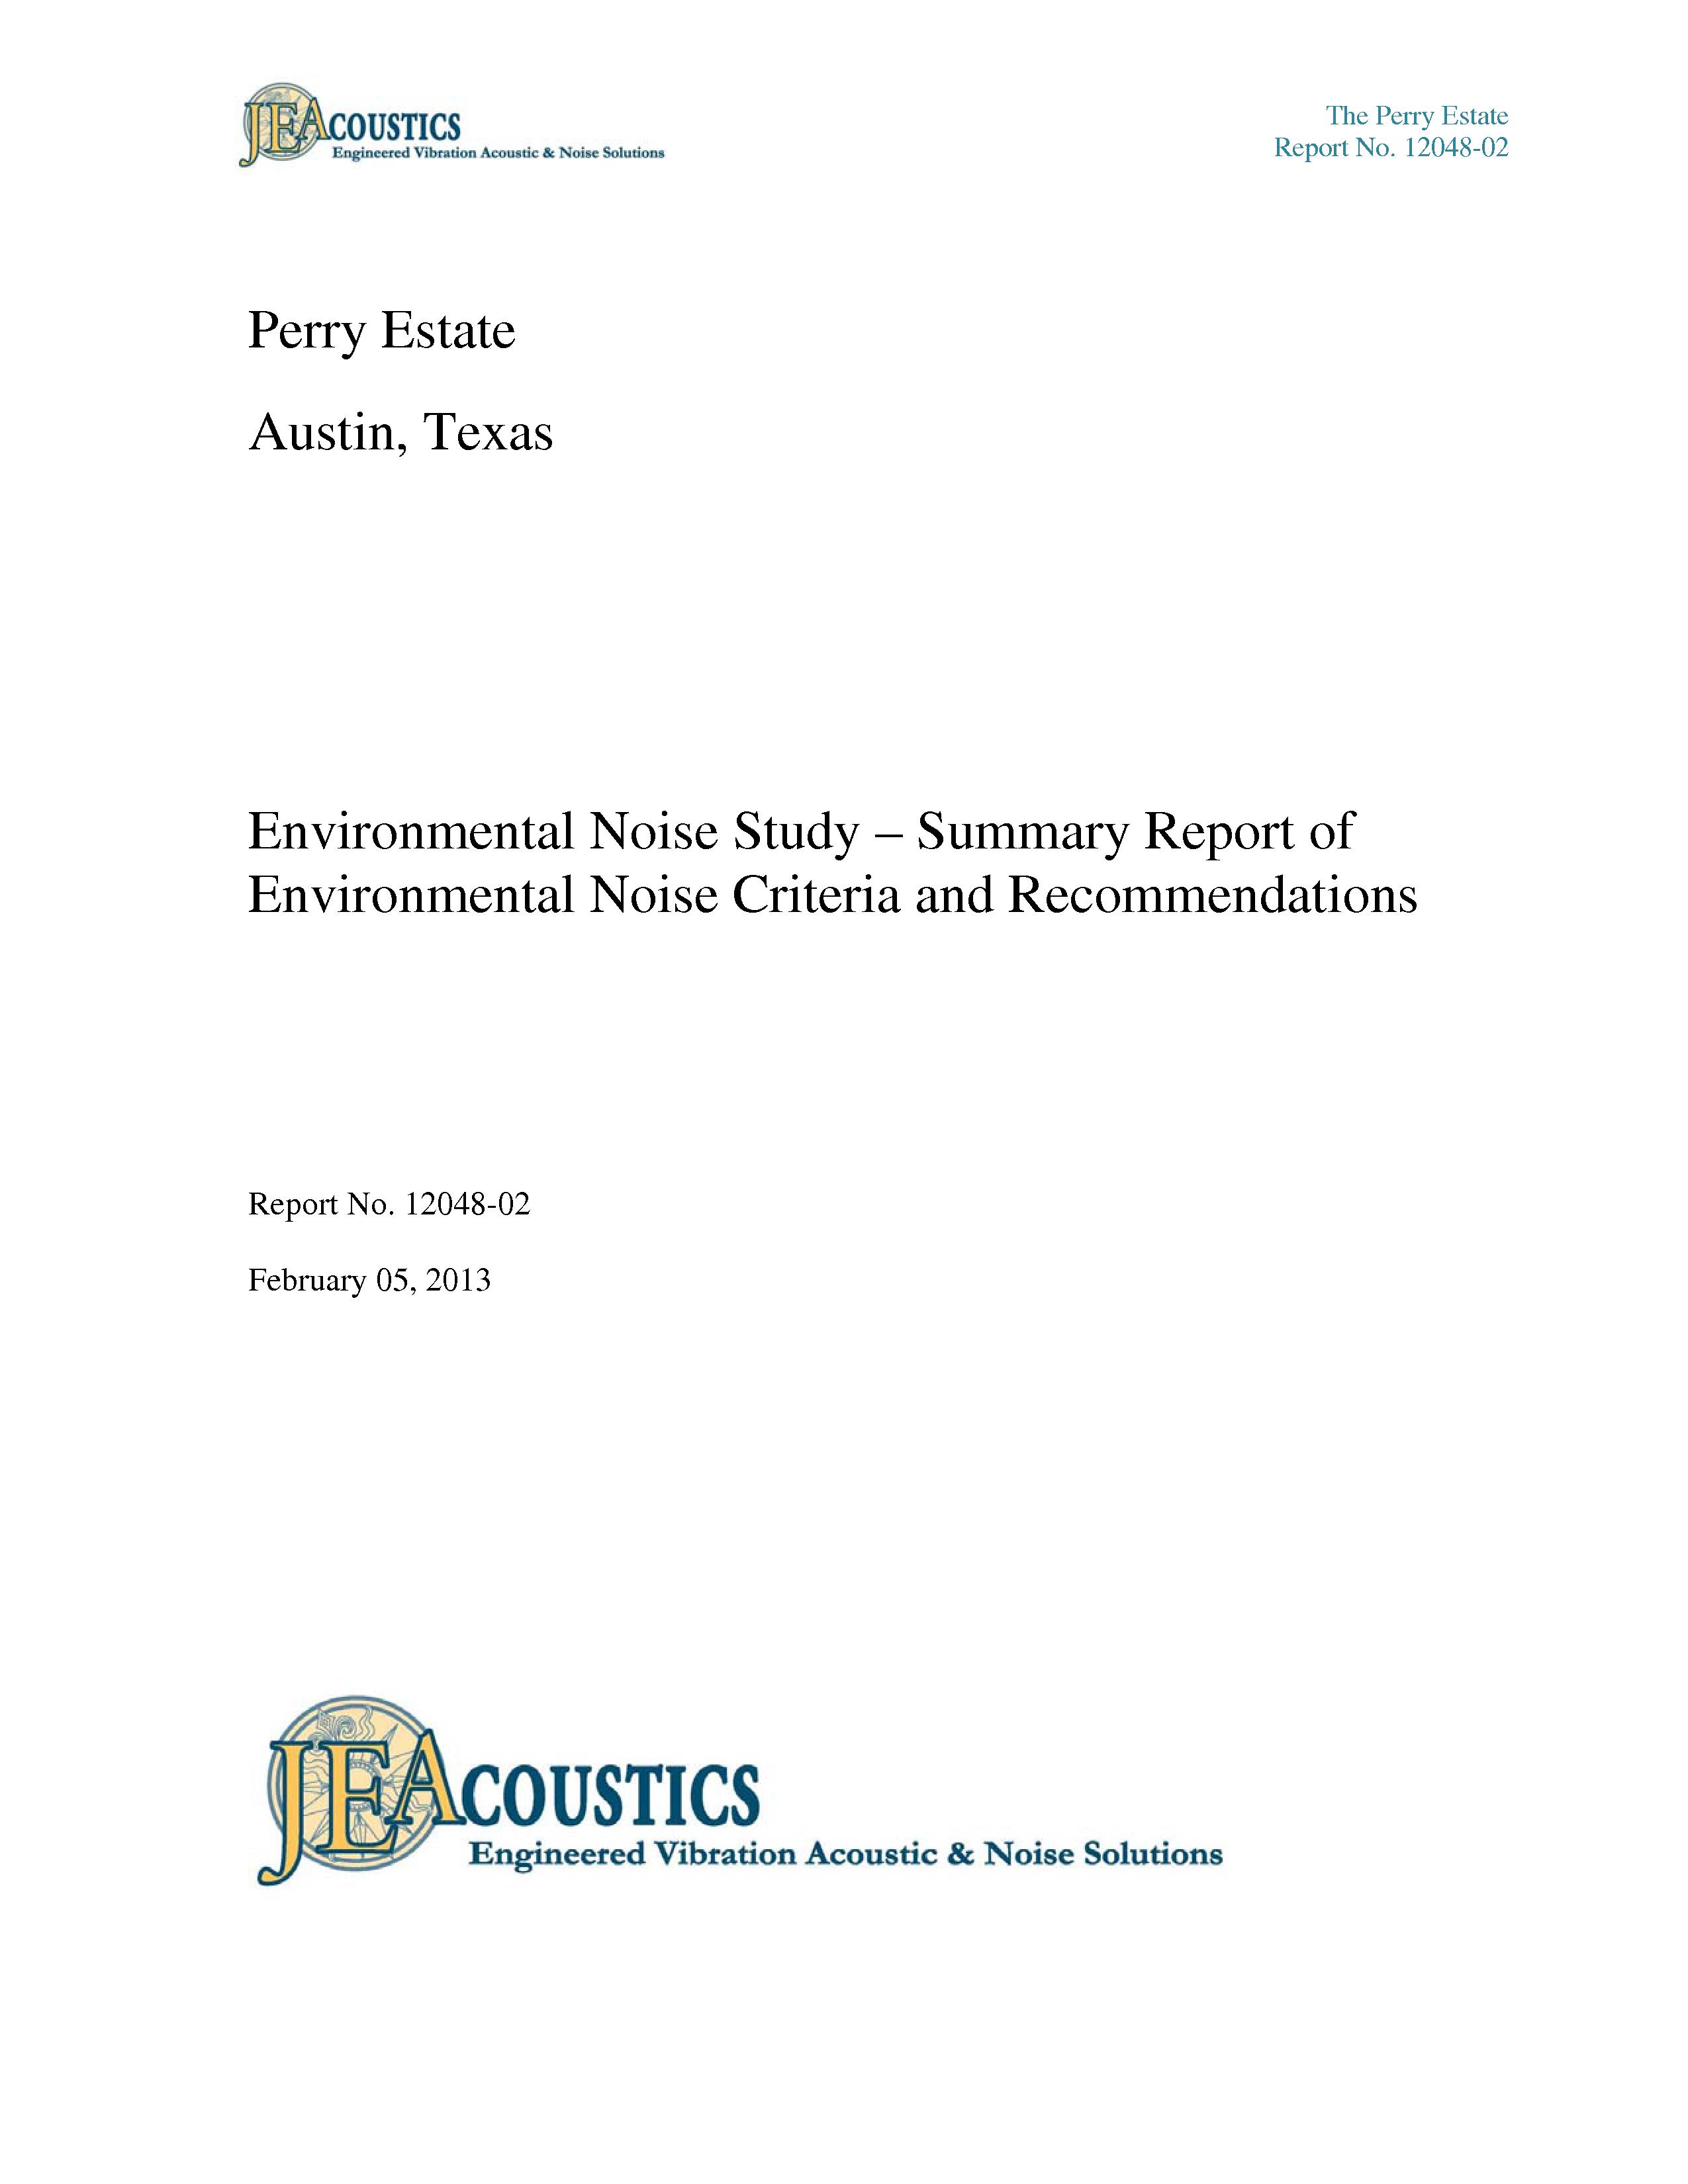 Chad Himmel's Evironmental Noise Criteria and Recommendations Report